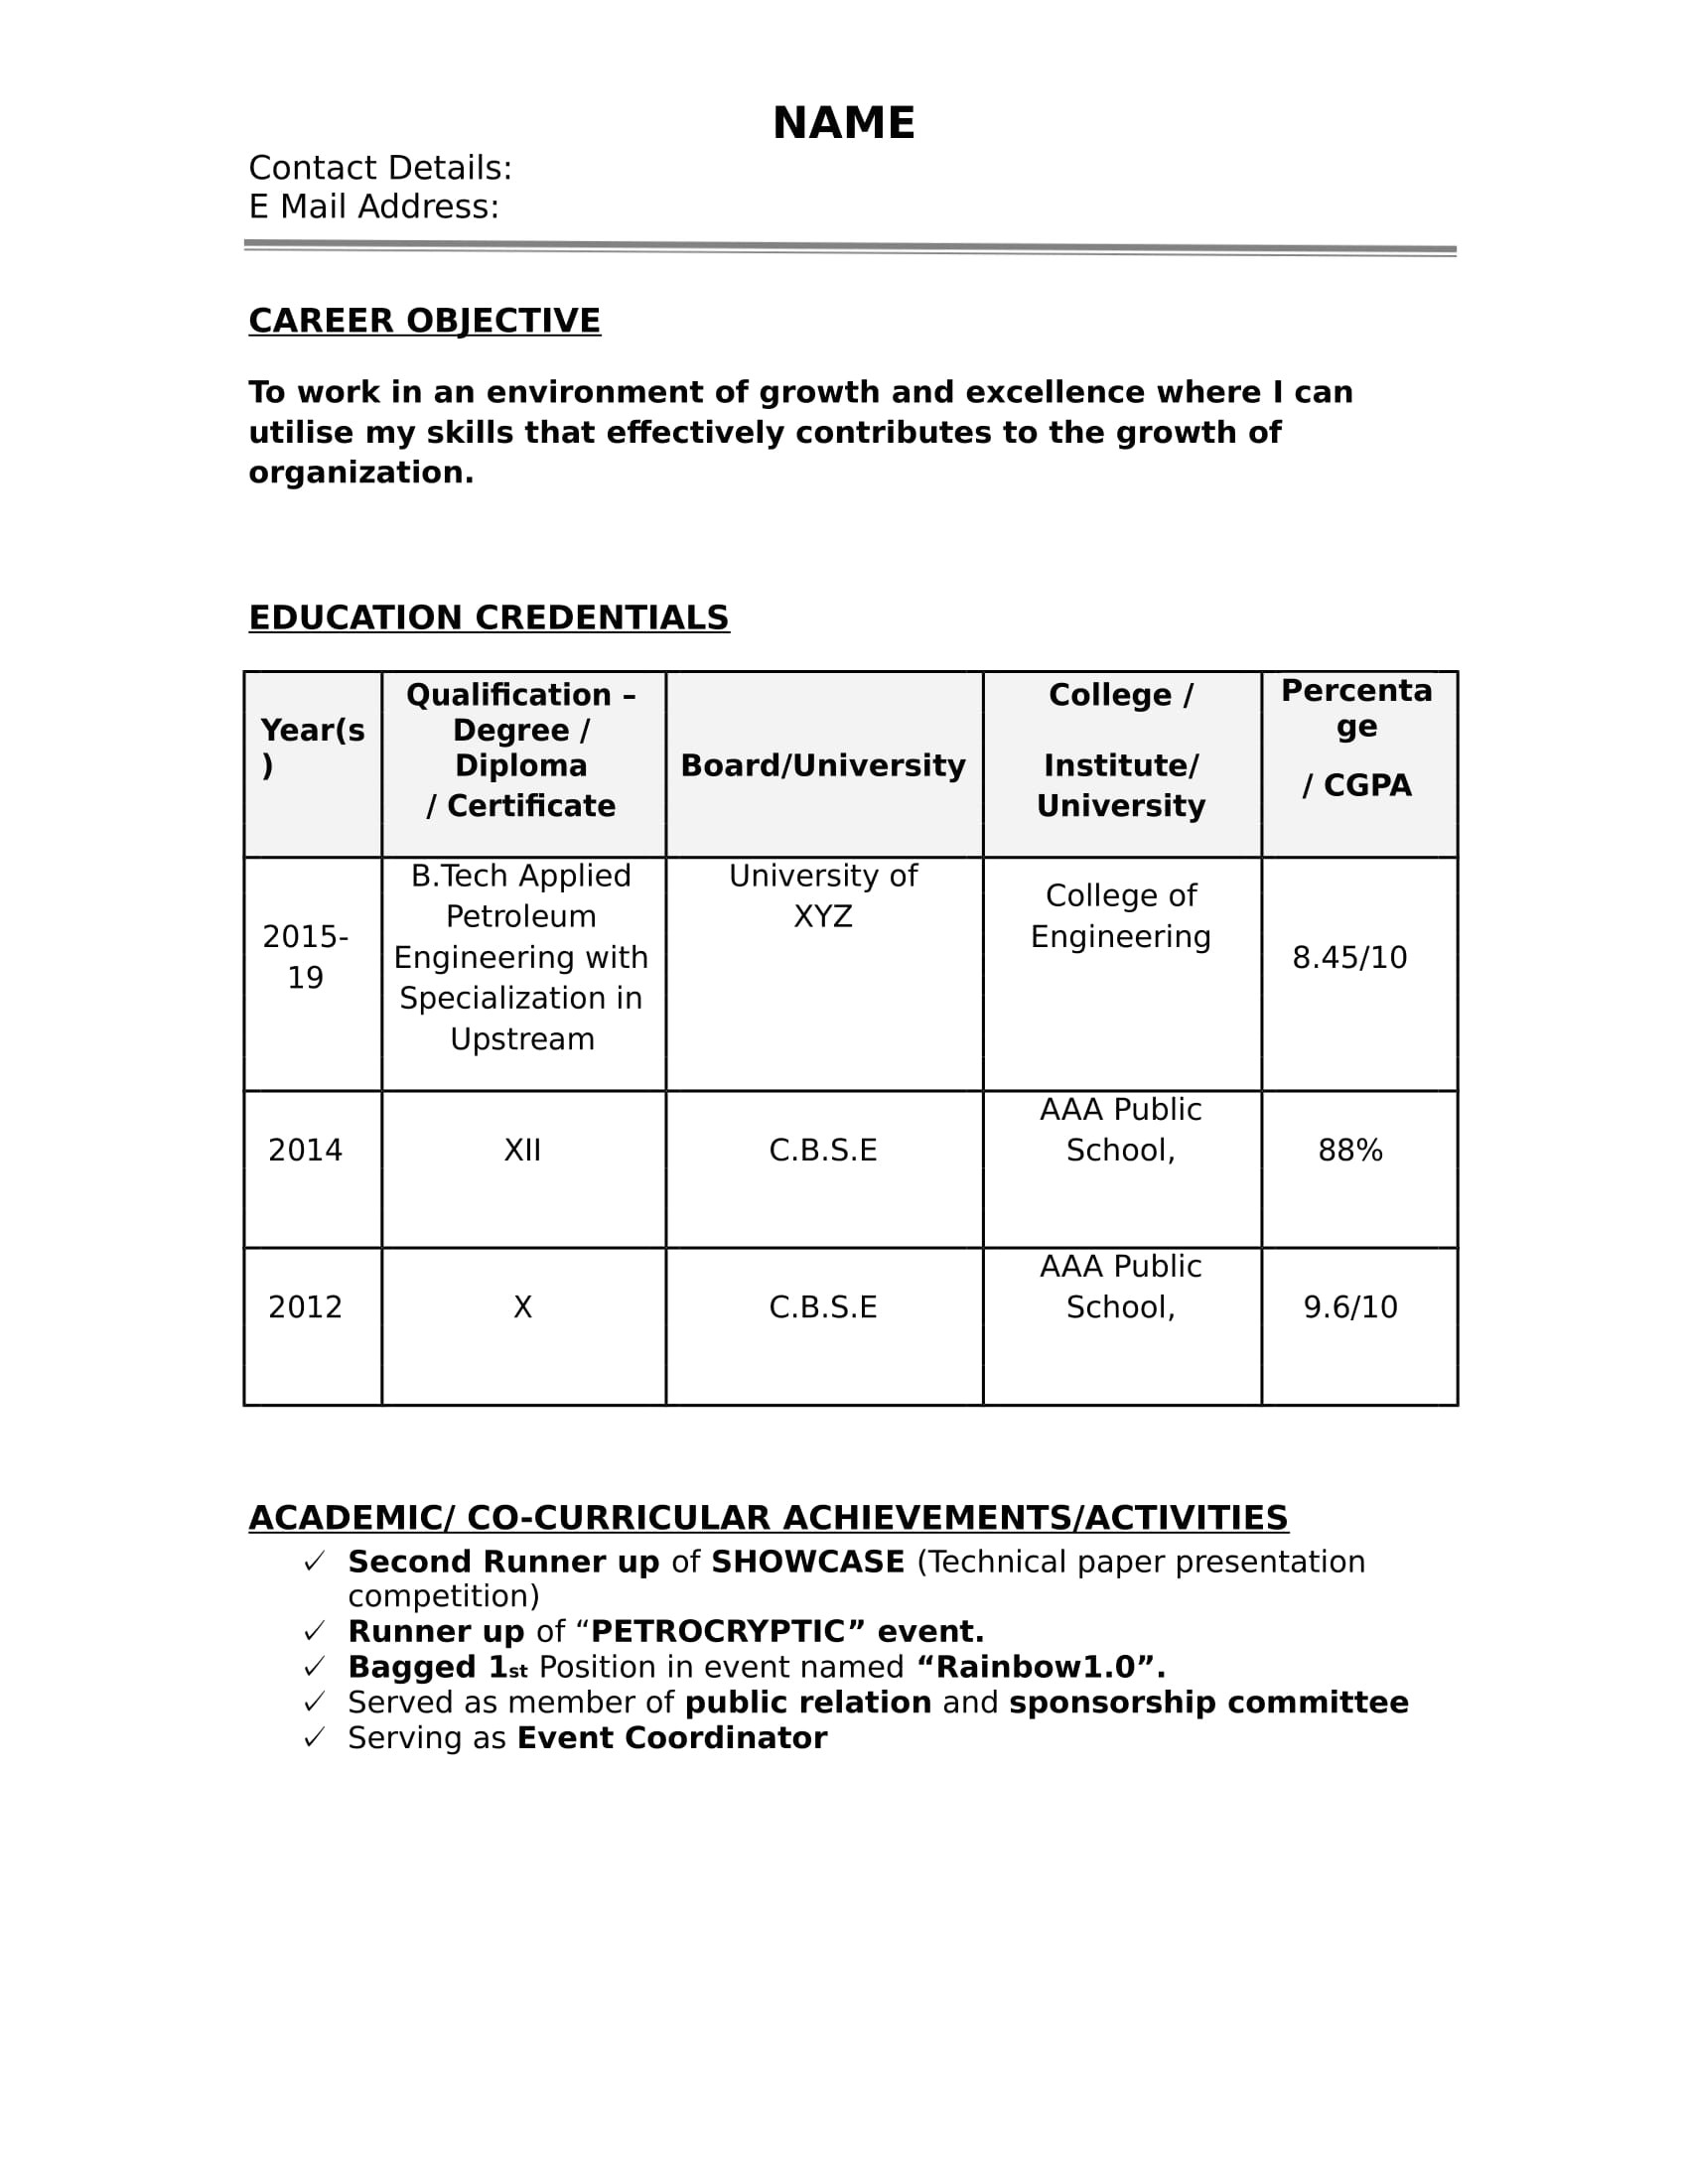 Resume format Word Download for Freshers Resume Samples for Freshers Resume Samples Free